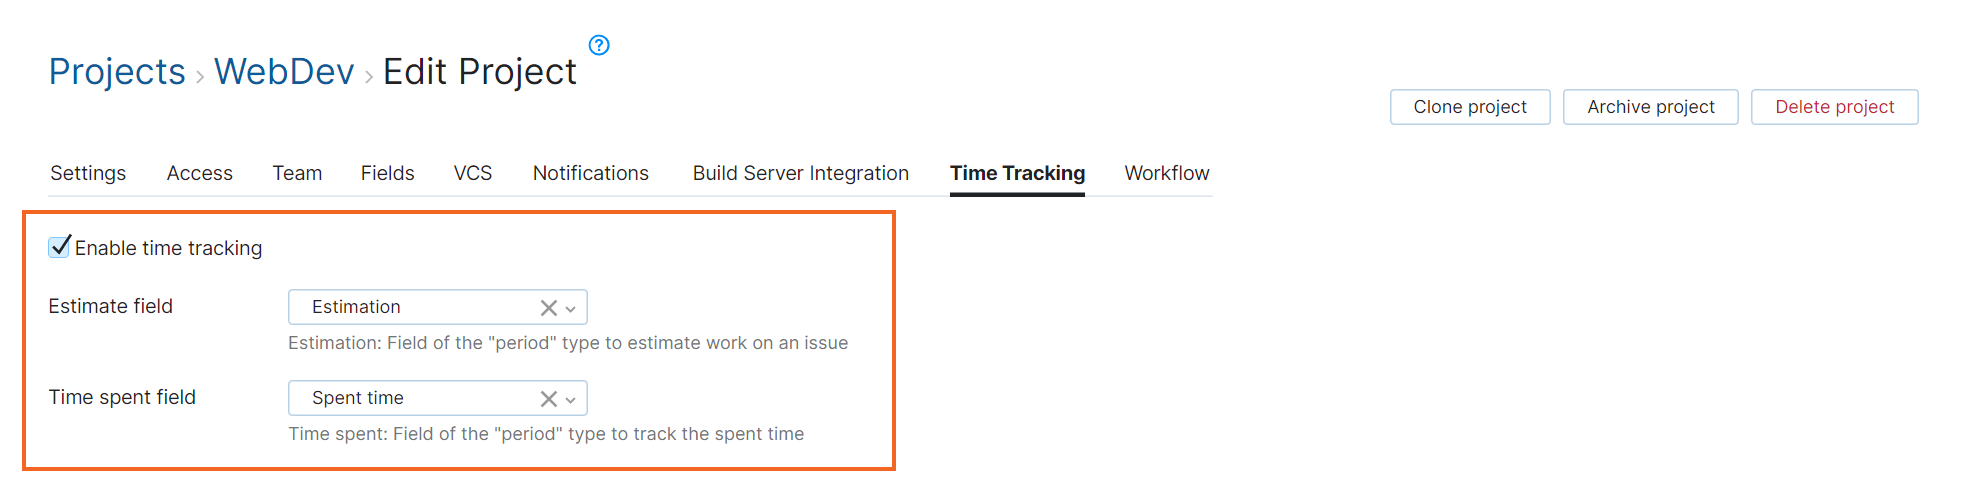 Agile time tracking project settings